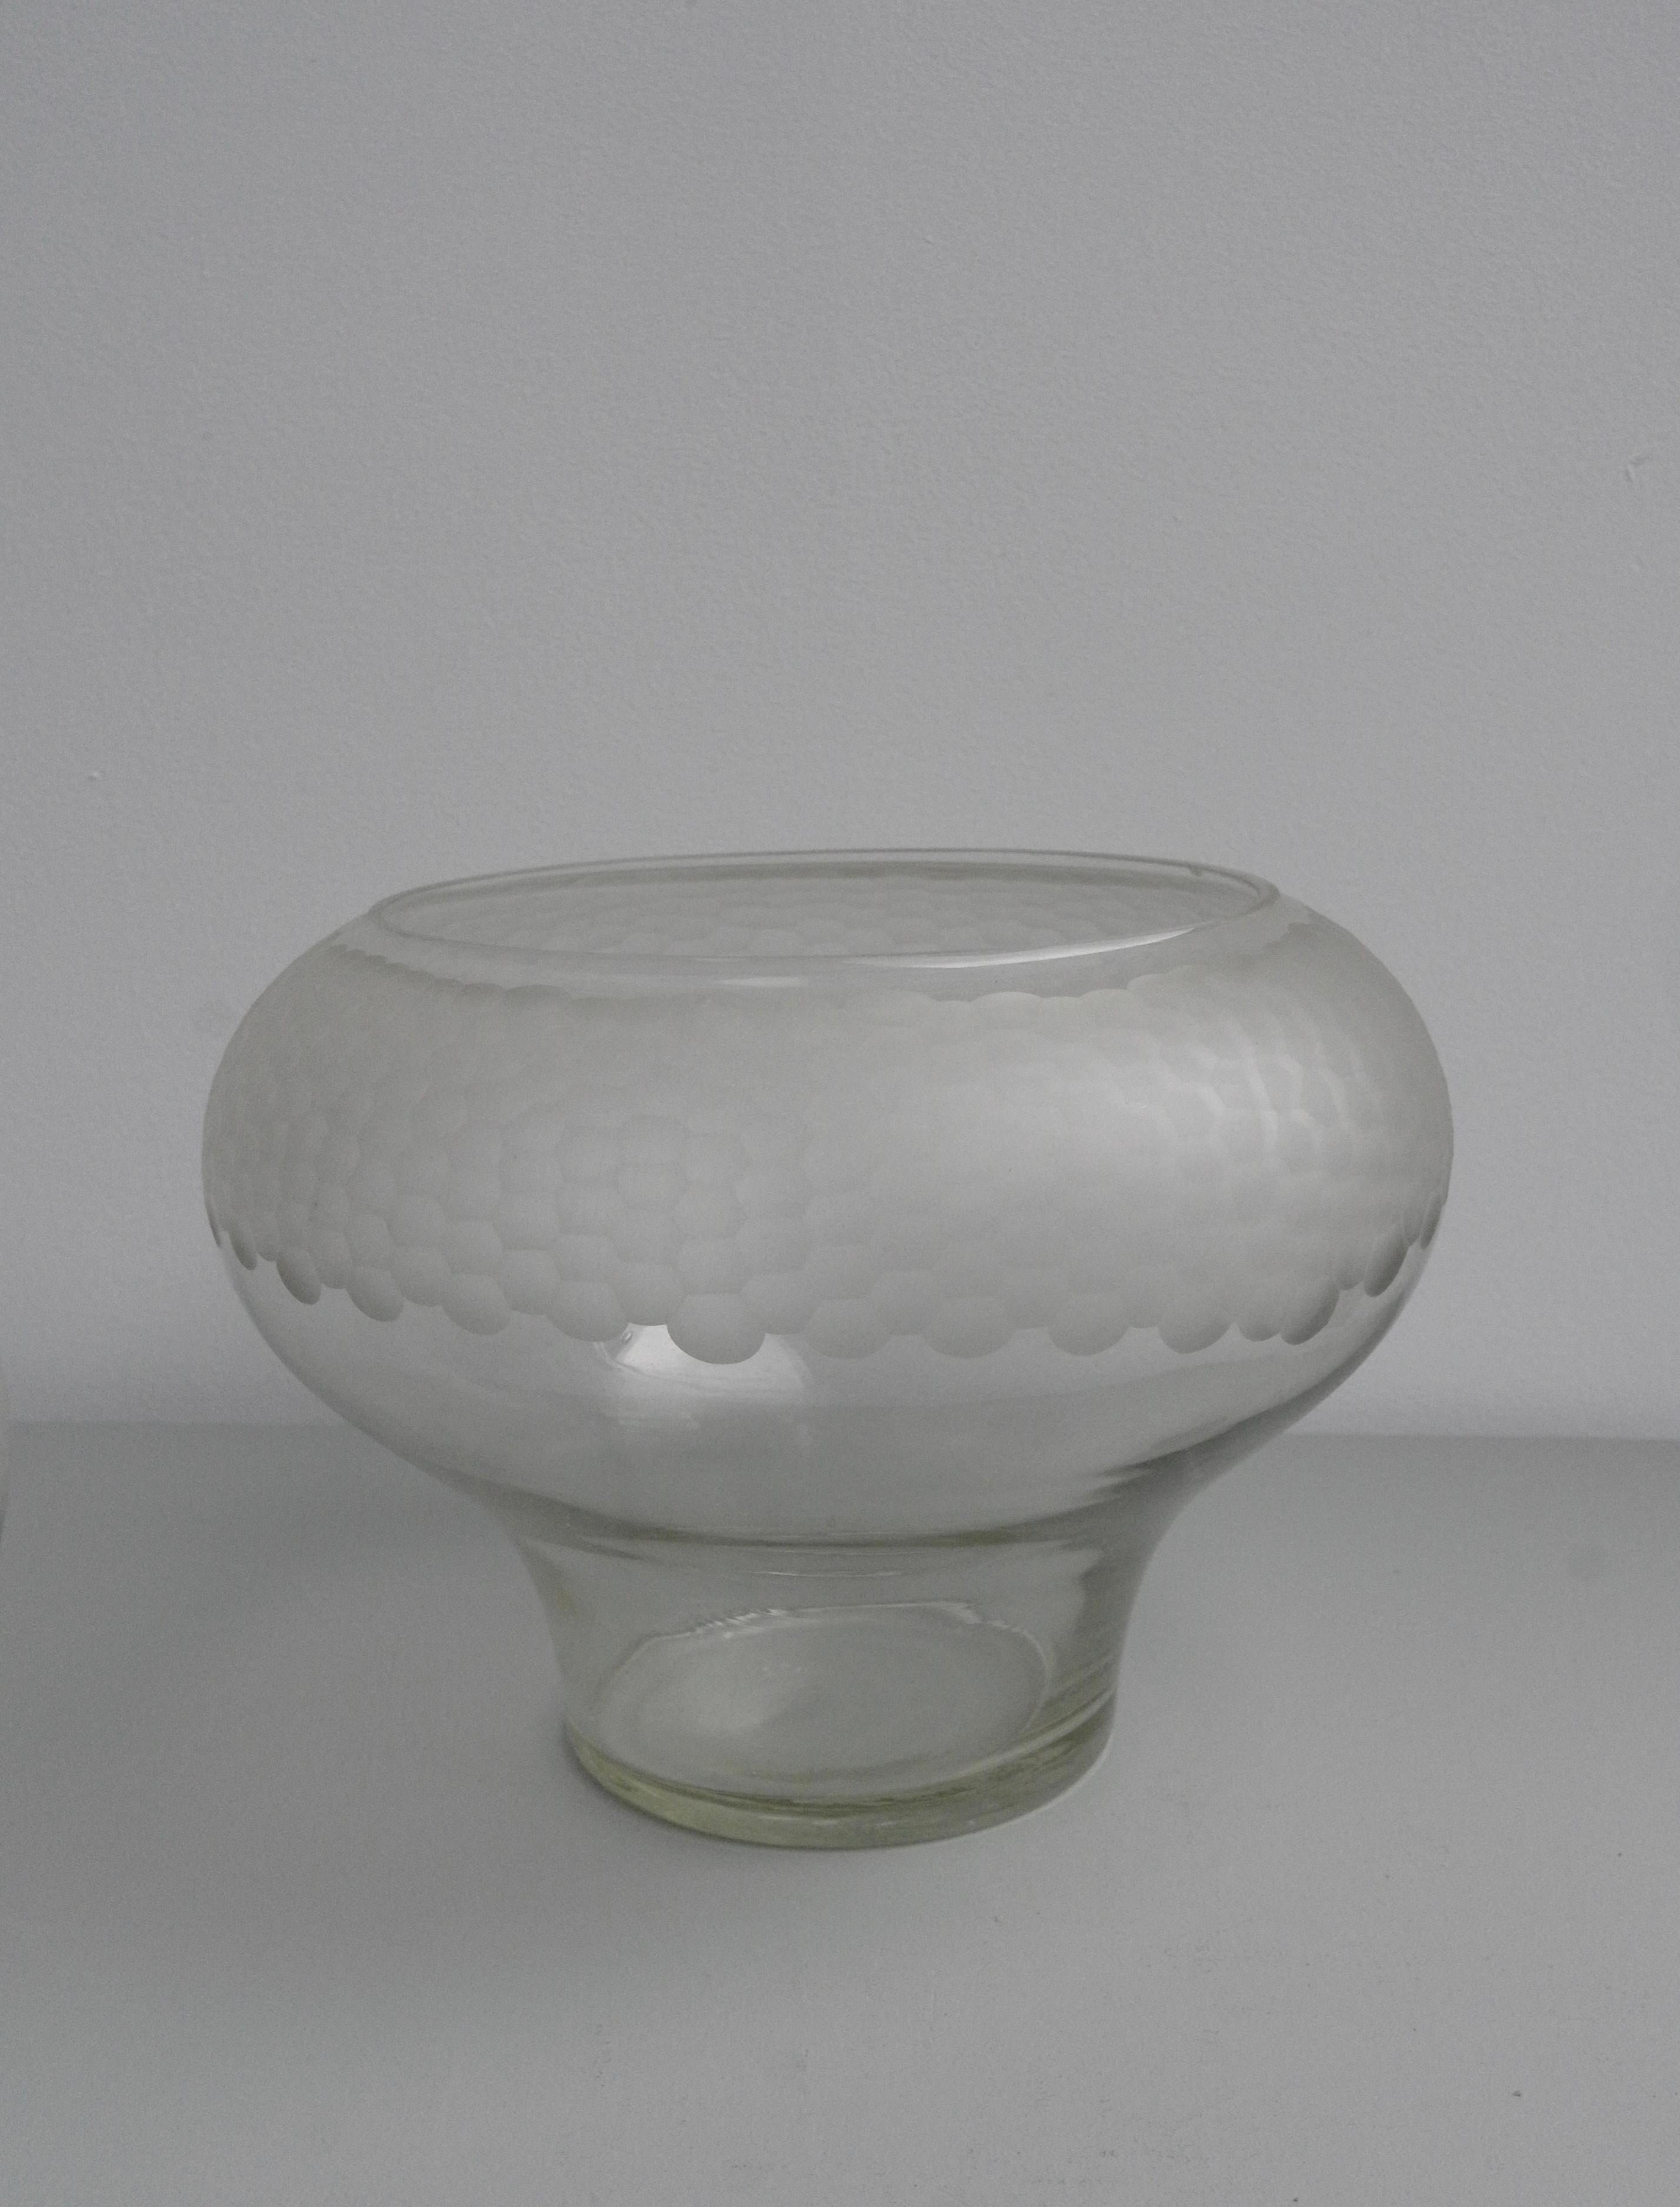 Pair of Large Decorative Honeycomb Midcentury Glass Bowl Vases For Sale 1